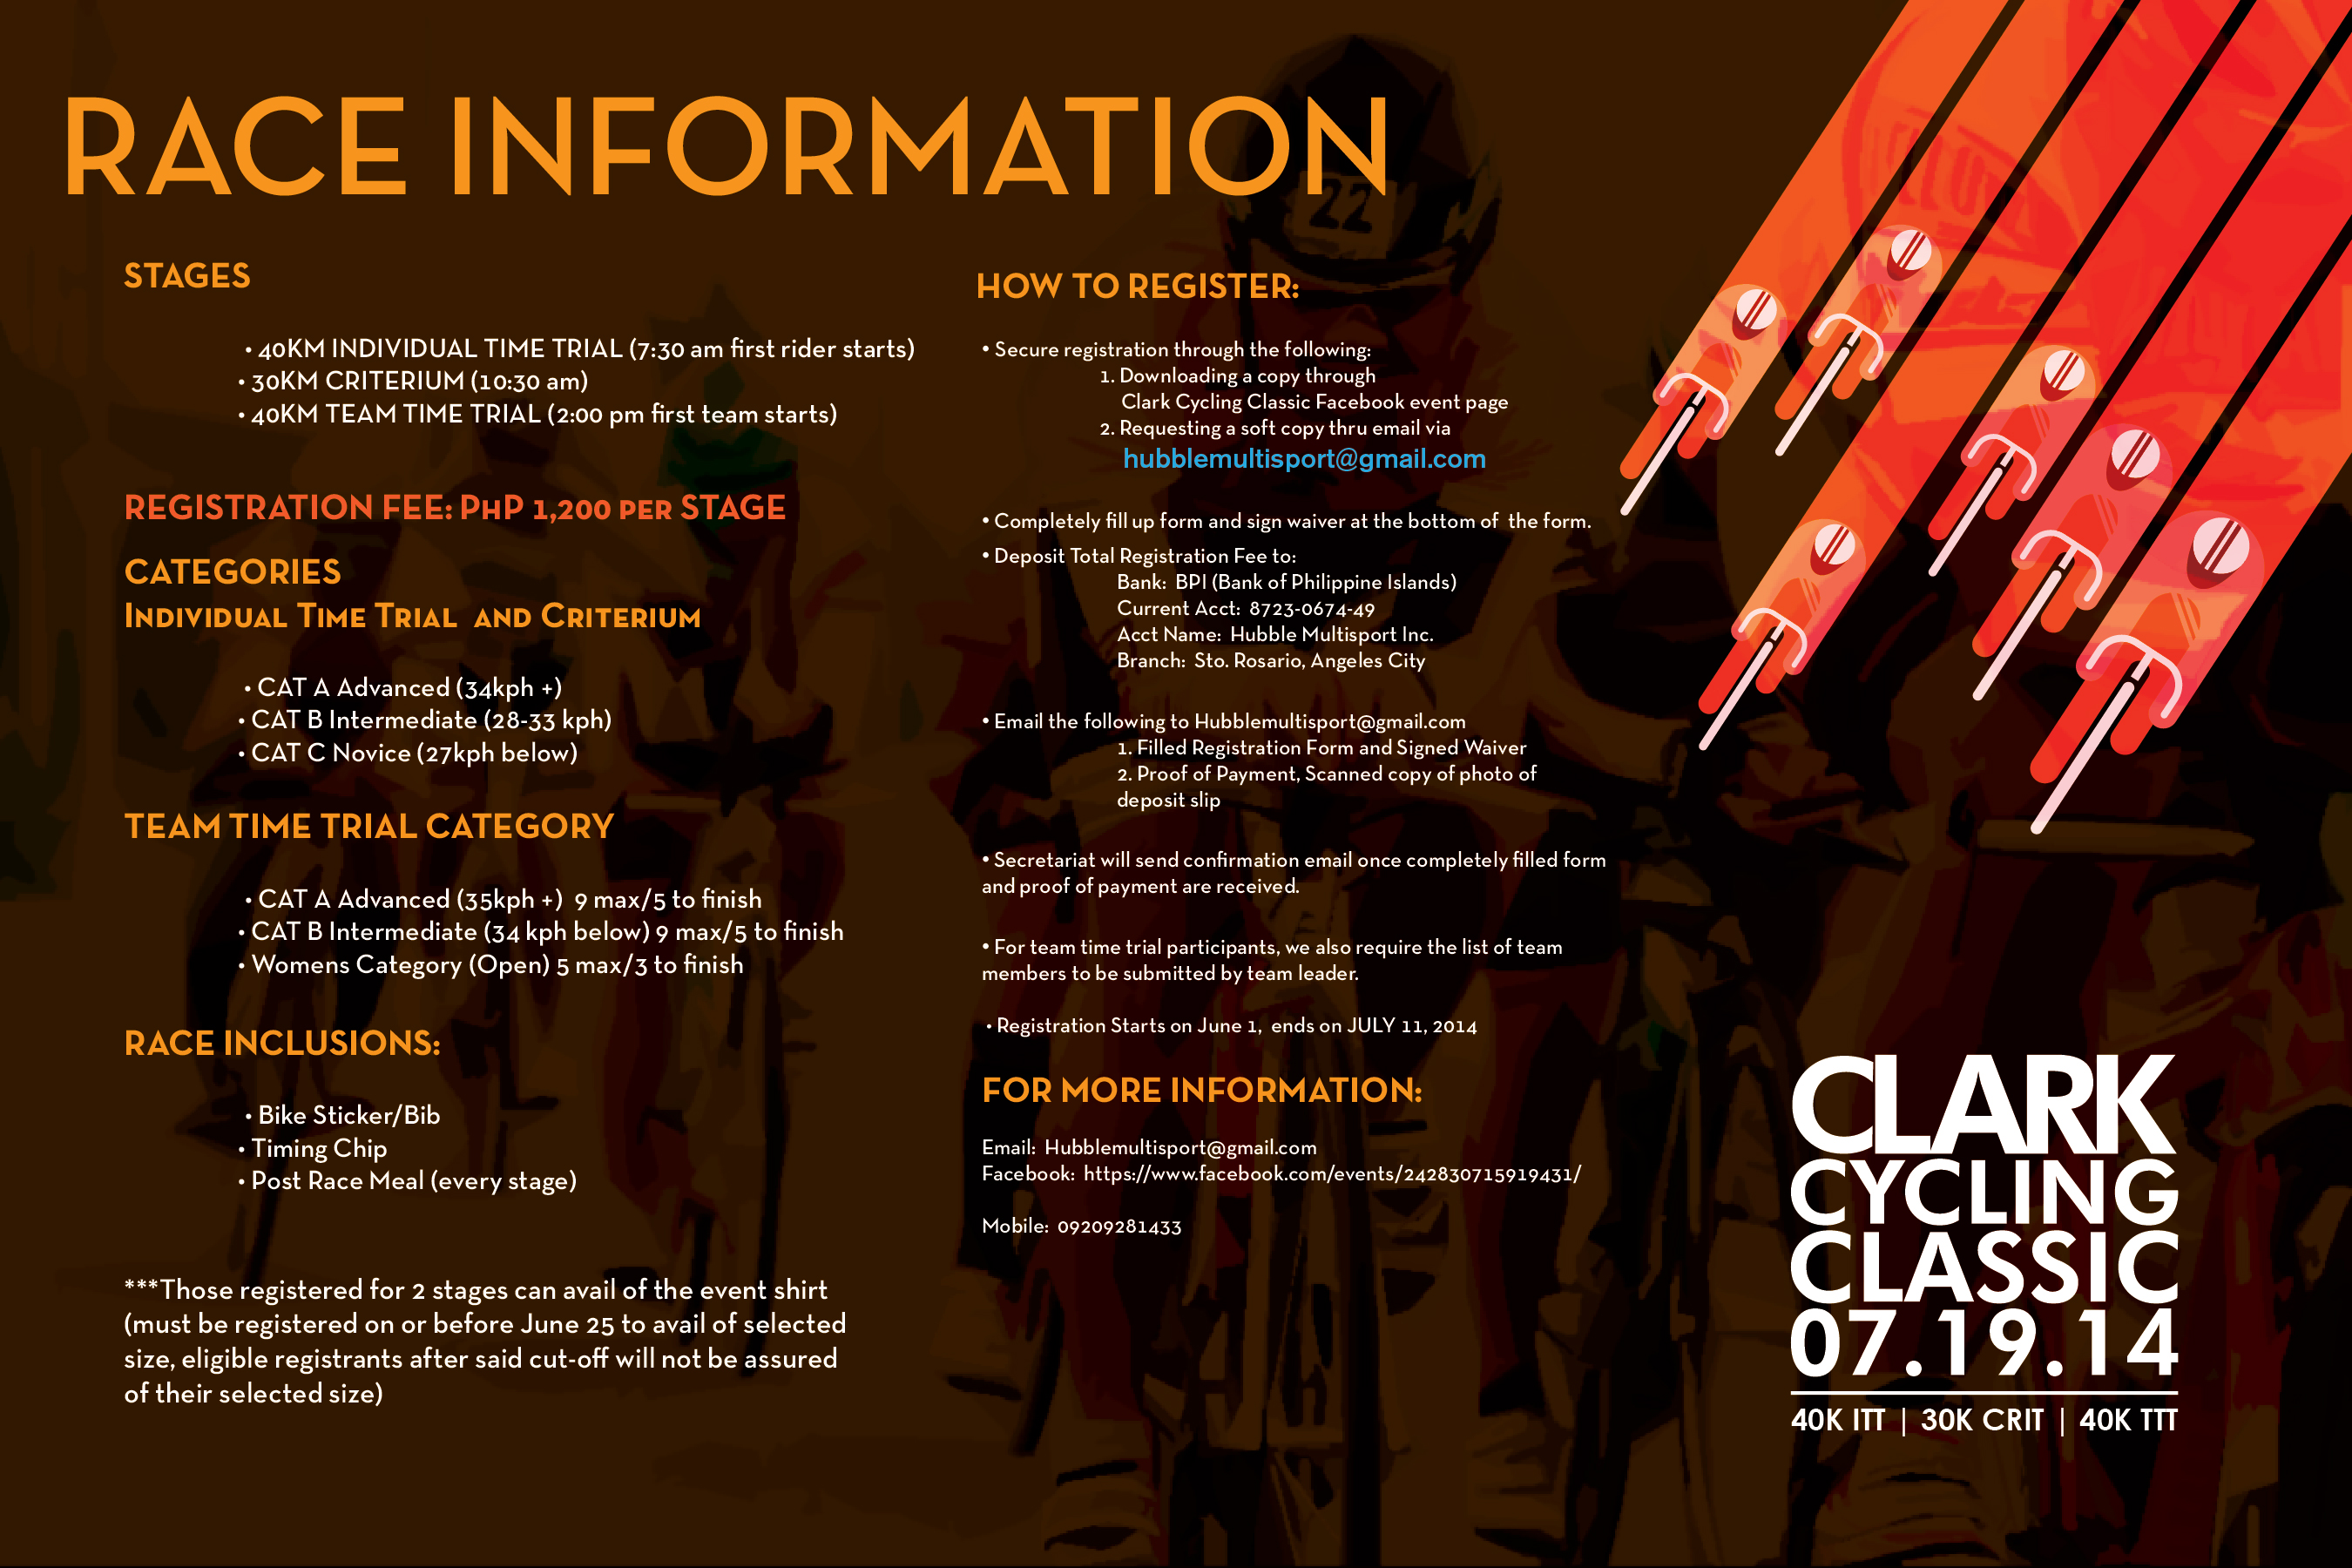 clark-cycling-classic-2014-poster